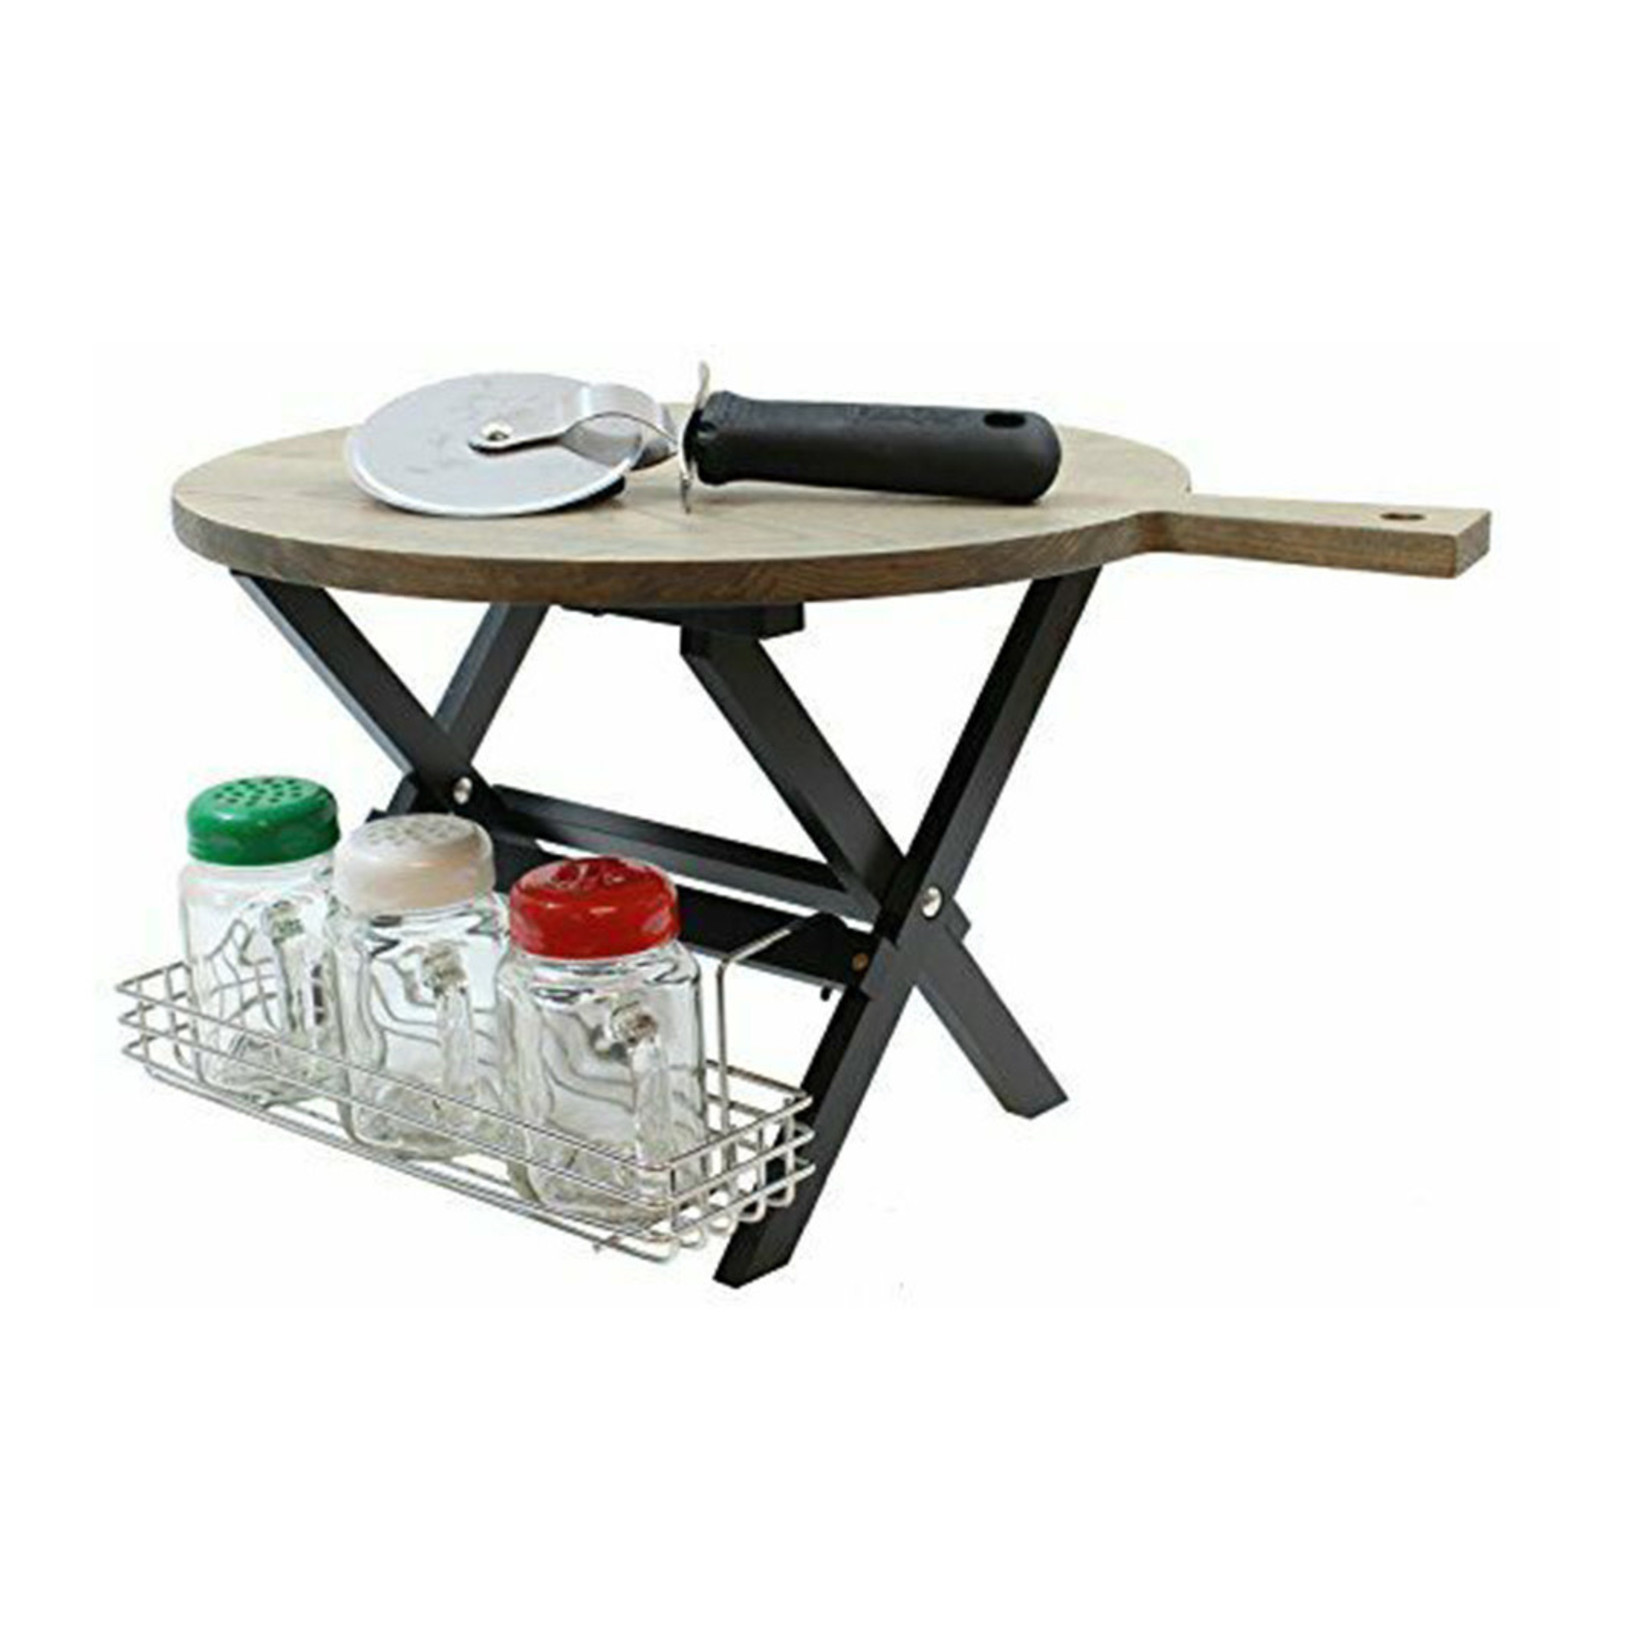 (3) Tray & - Rack, Kit, Mini Boutique Pizza Mason Jars, Ashwood 8oz Paddle The Round Frog Cutter Includes: Stand, Pizza Fancy